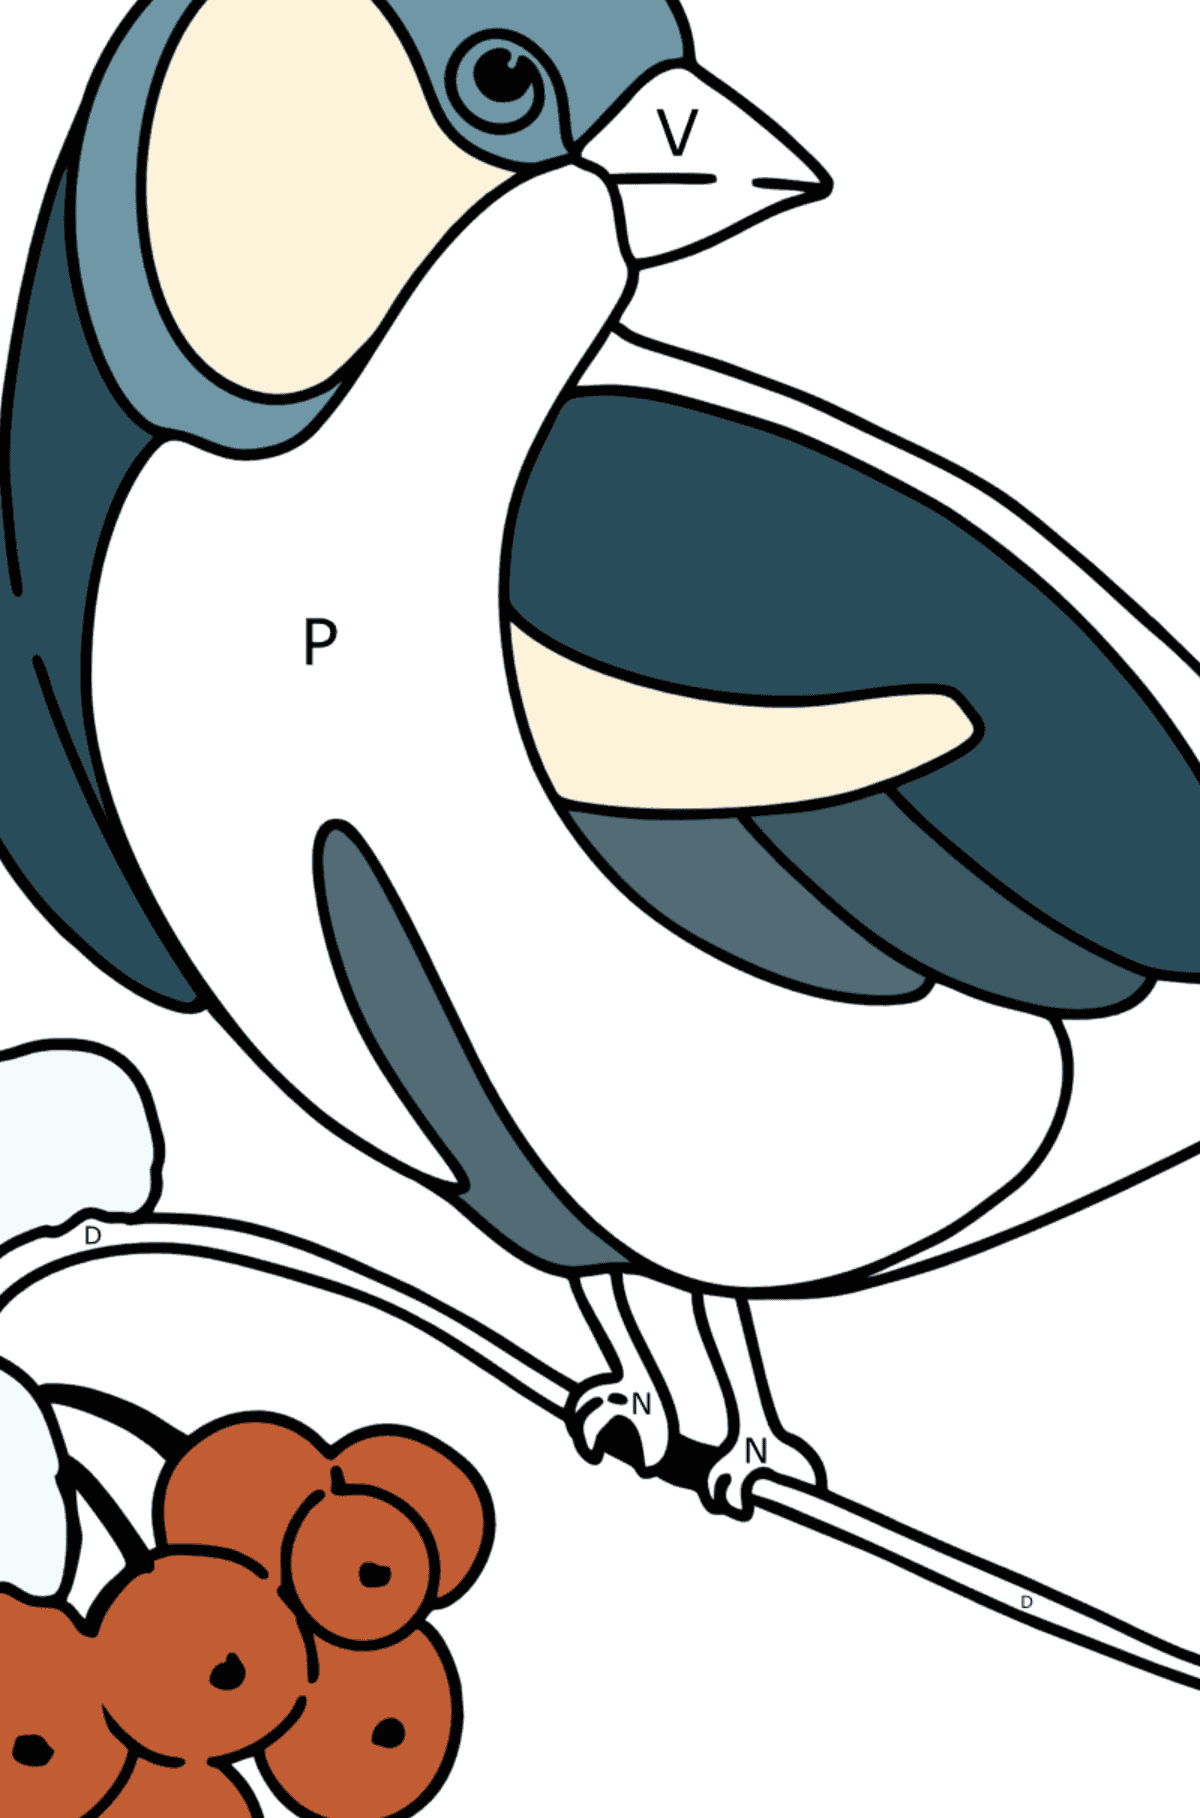 Coloring page - Titmouse on Mountain Ash - Coloring by Letters for Kids